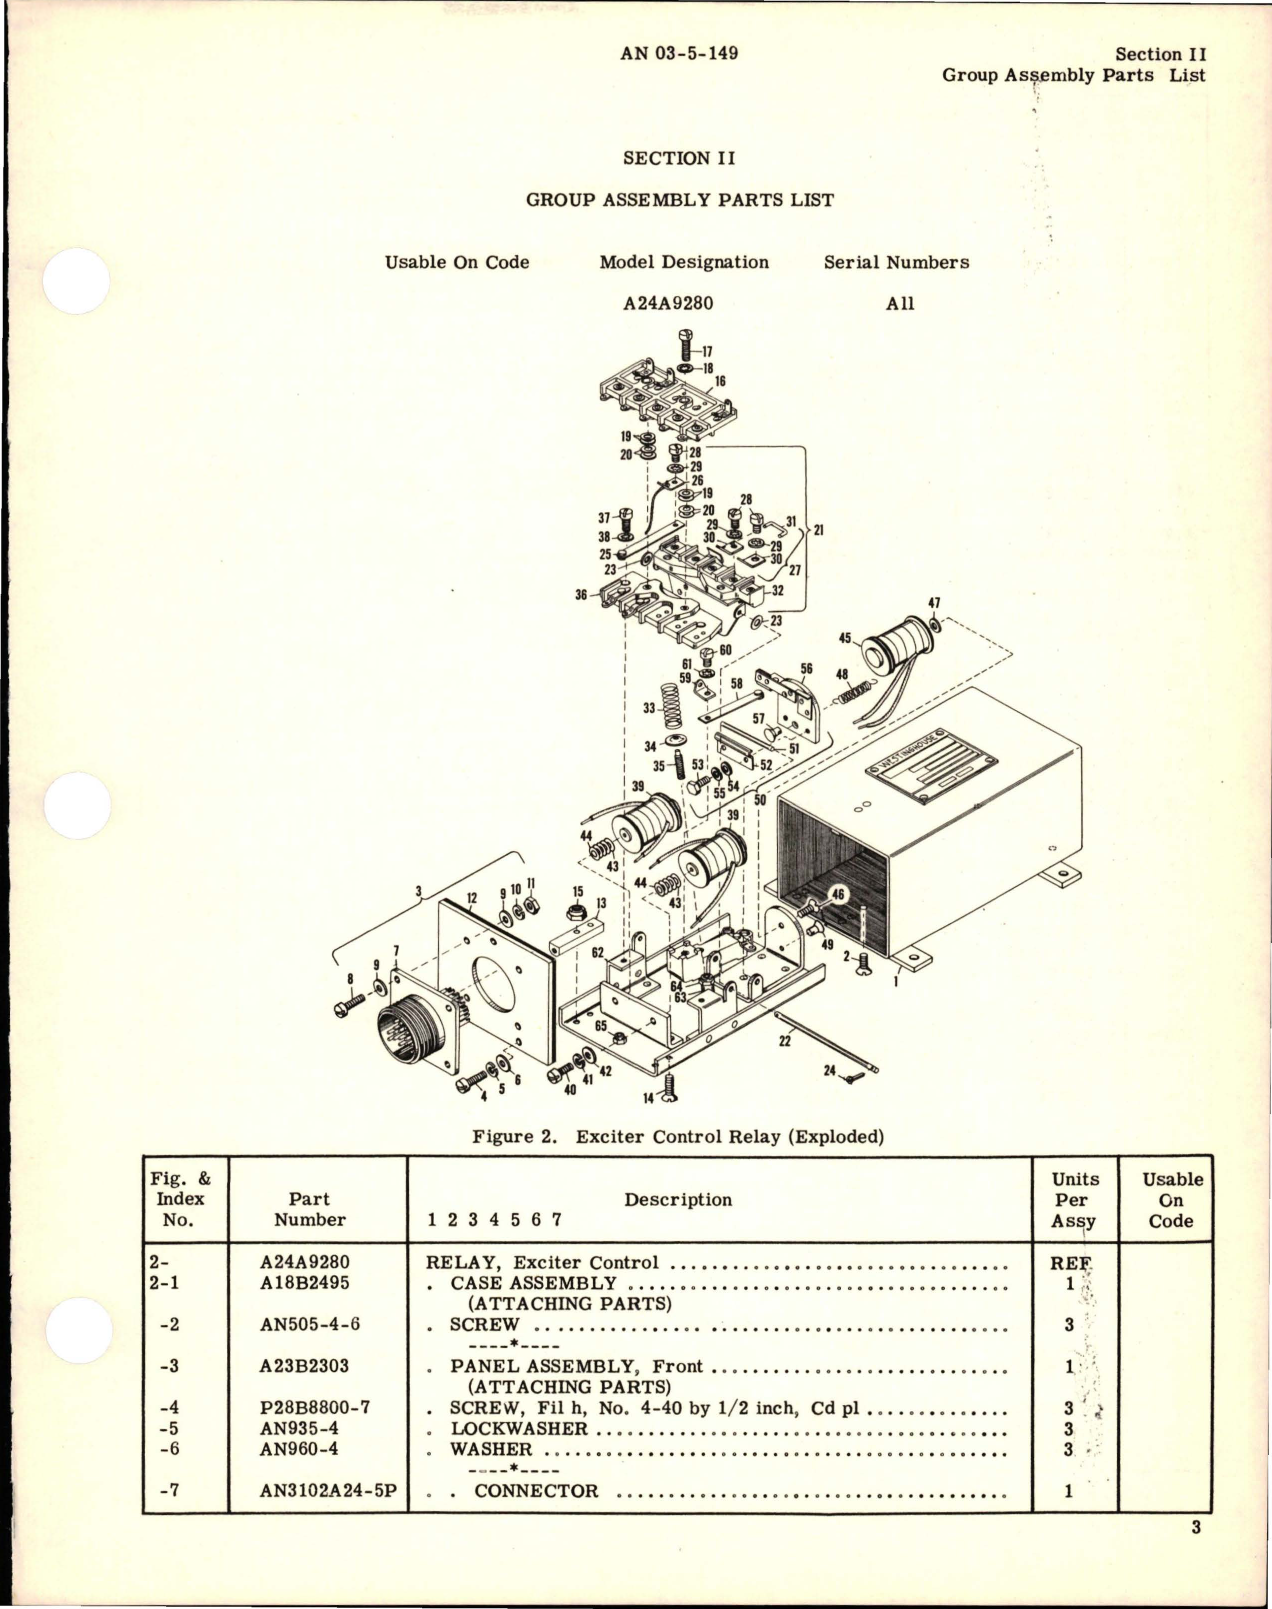 Sample page 5 from AirCorps Library document: Illustrated Parts Breakdown for Exciter Control Relay - Type H-1 - Part A24A9280